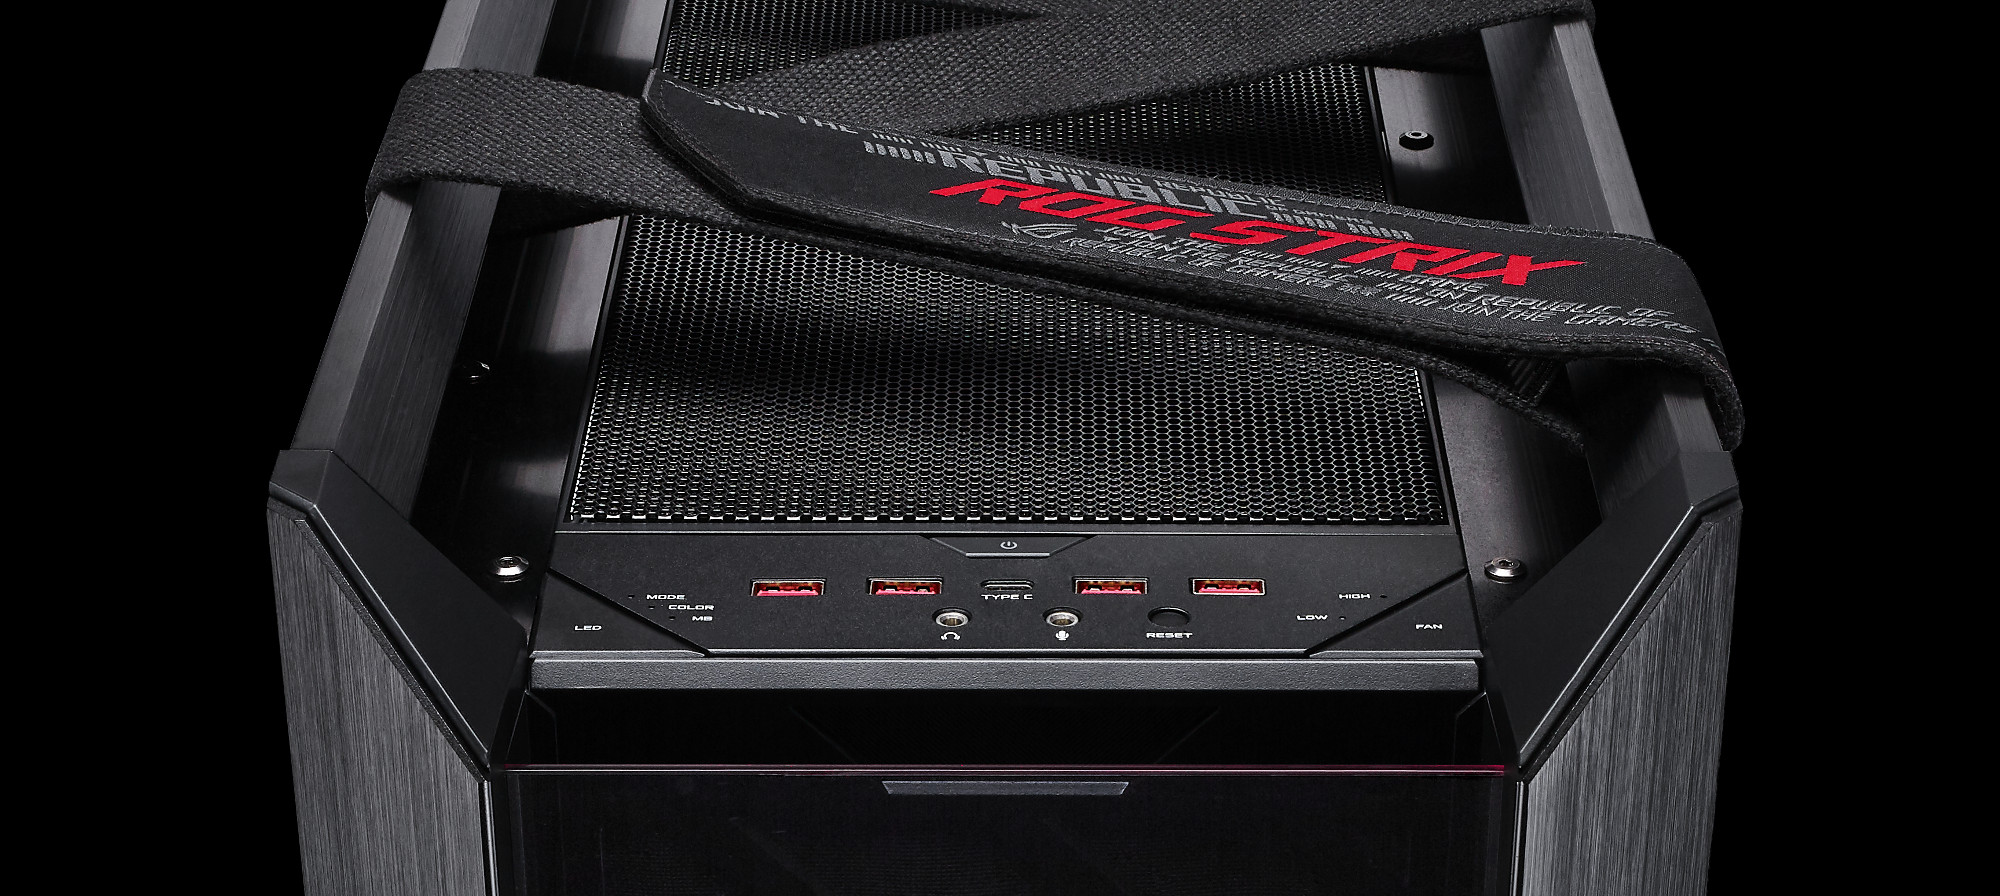 Making a case for an all ROG build: Introducing the ROG Strix Helios